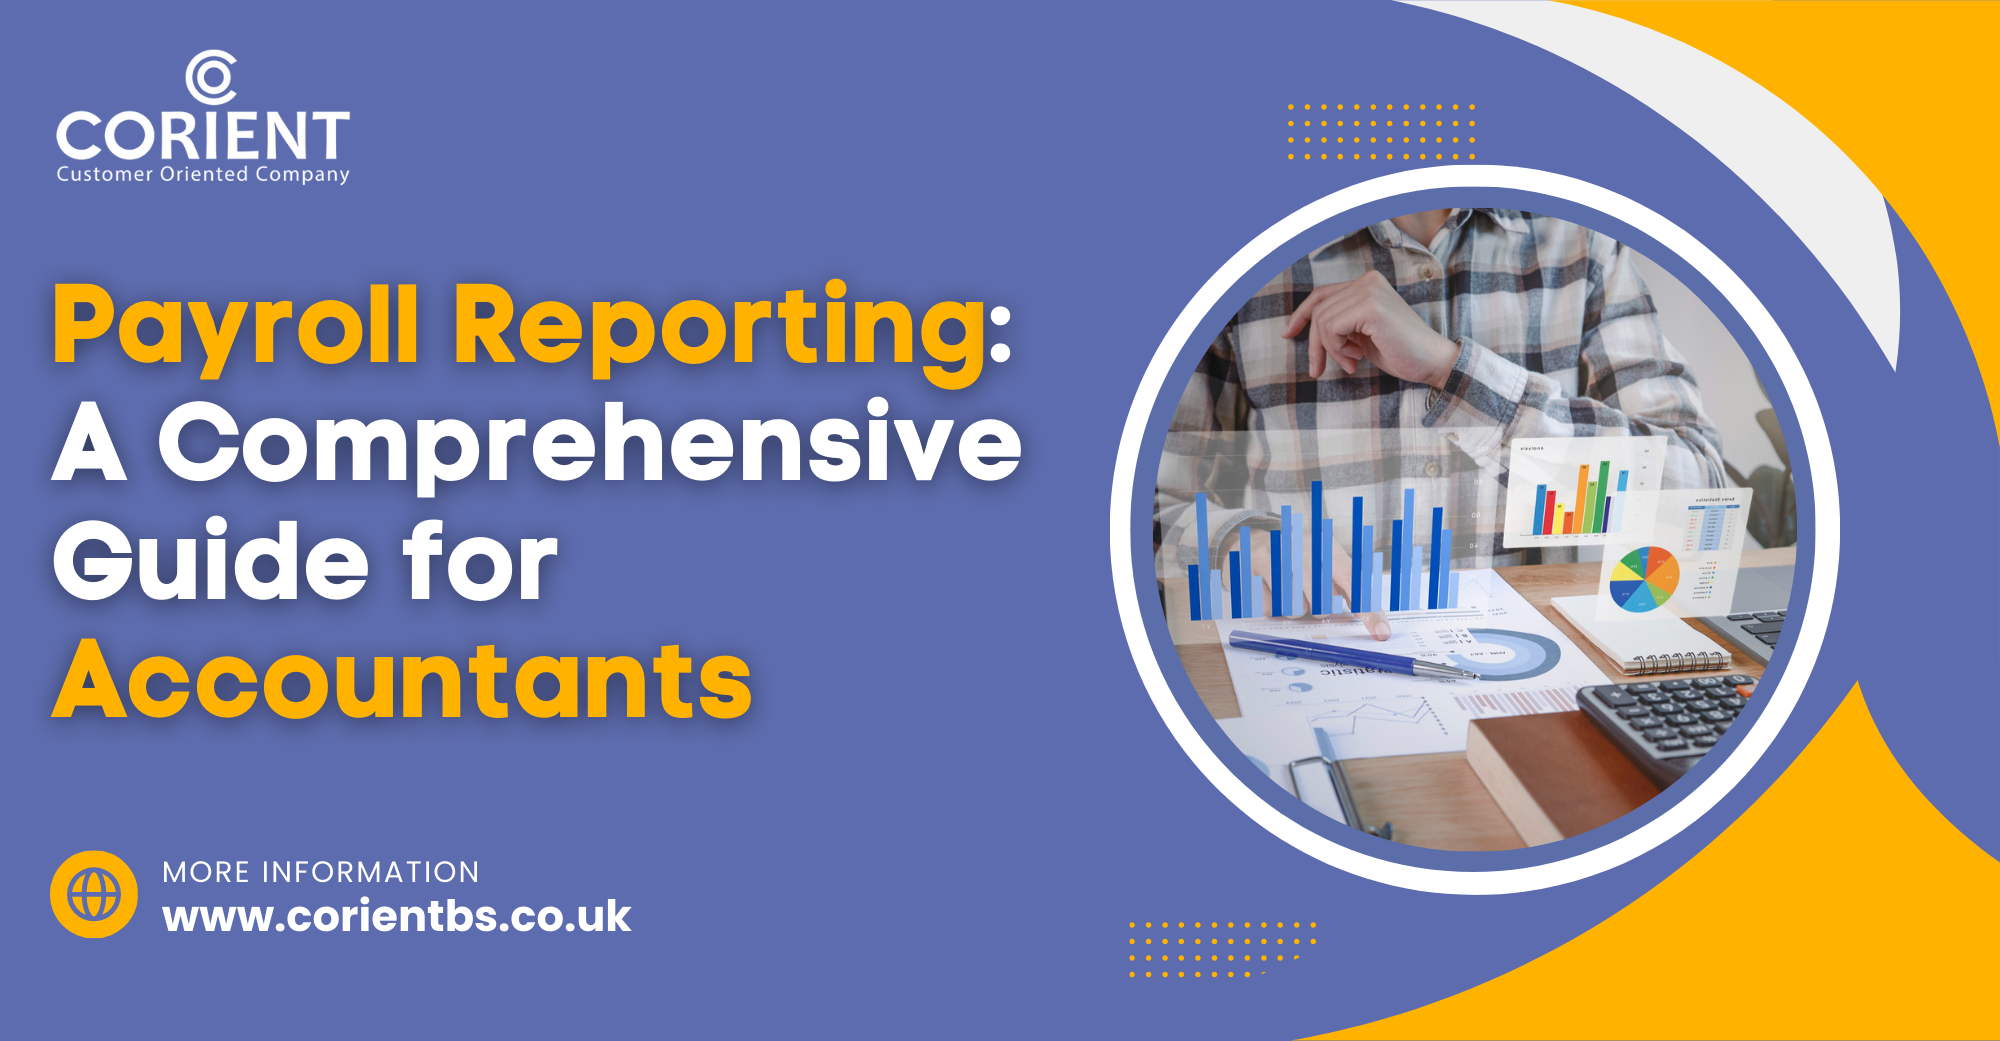 Payroll Reporting: A Comprehensive Guide for Accountants